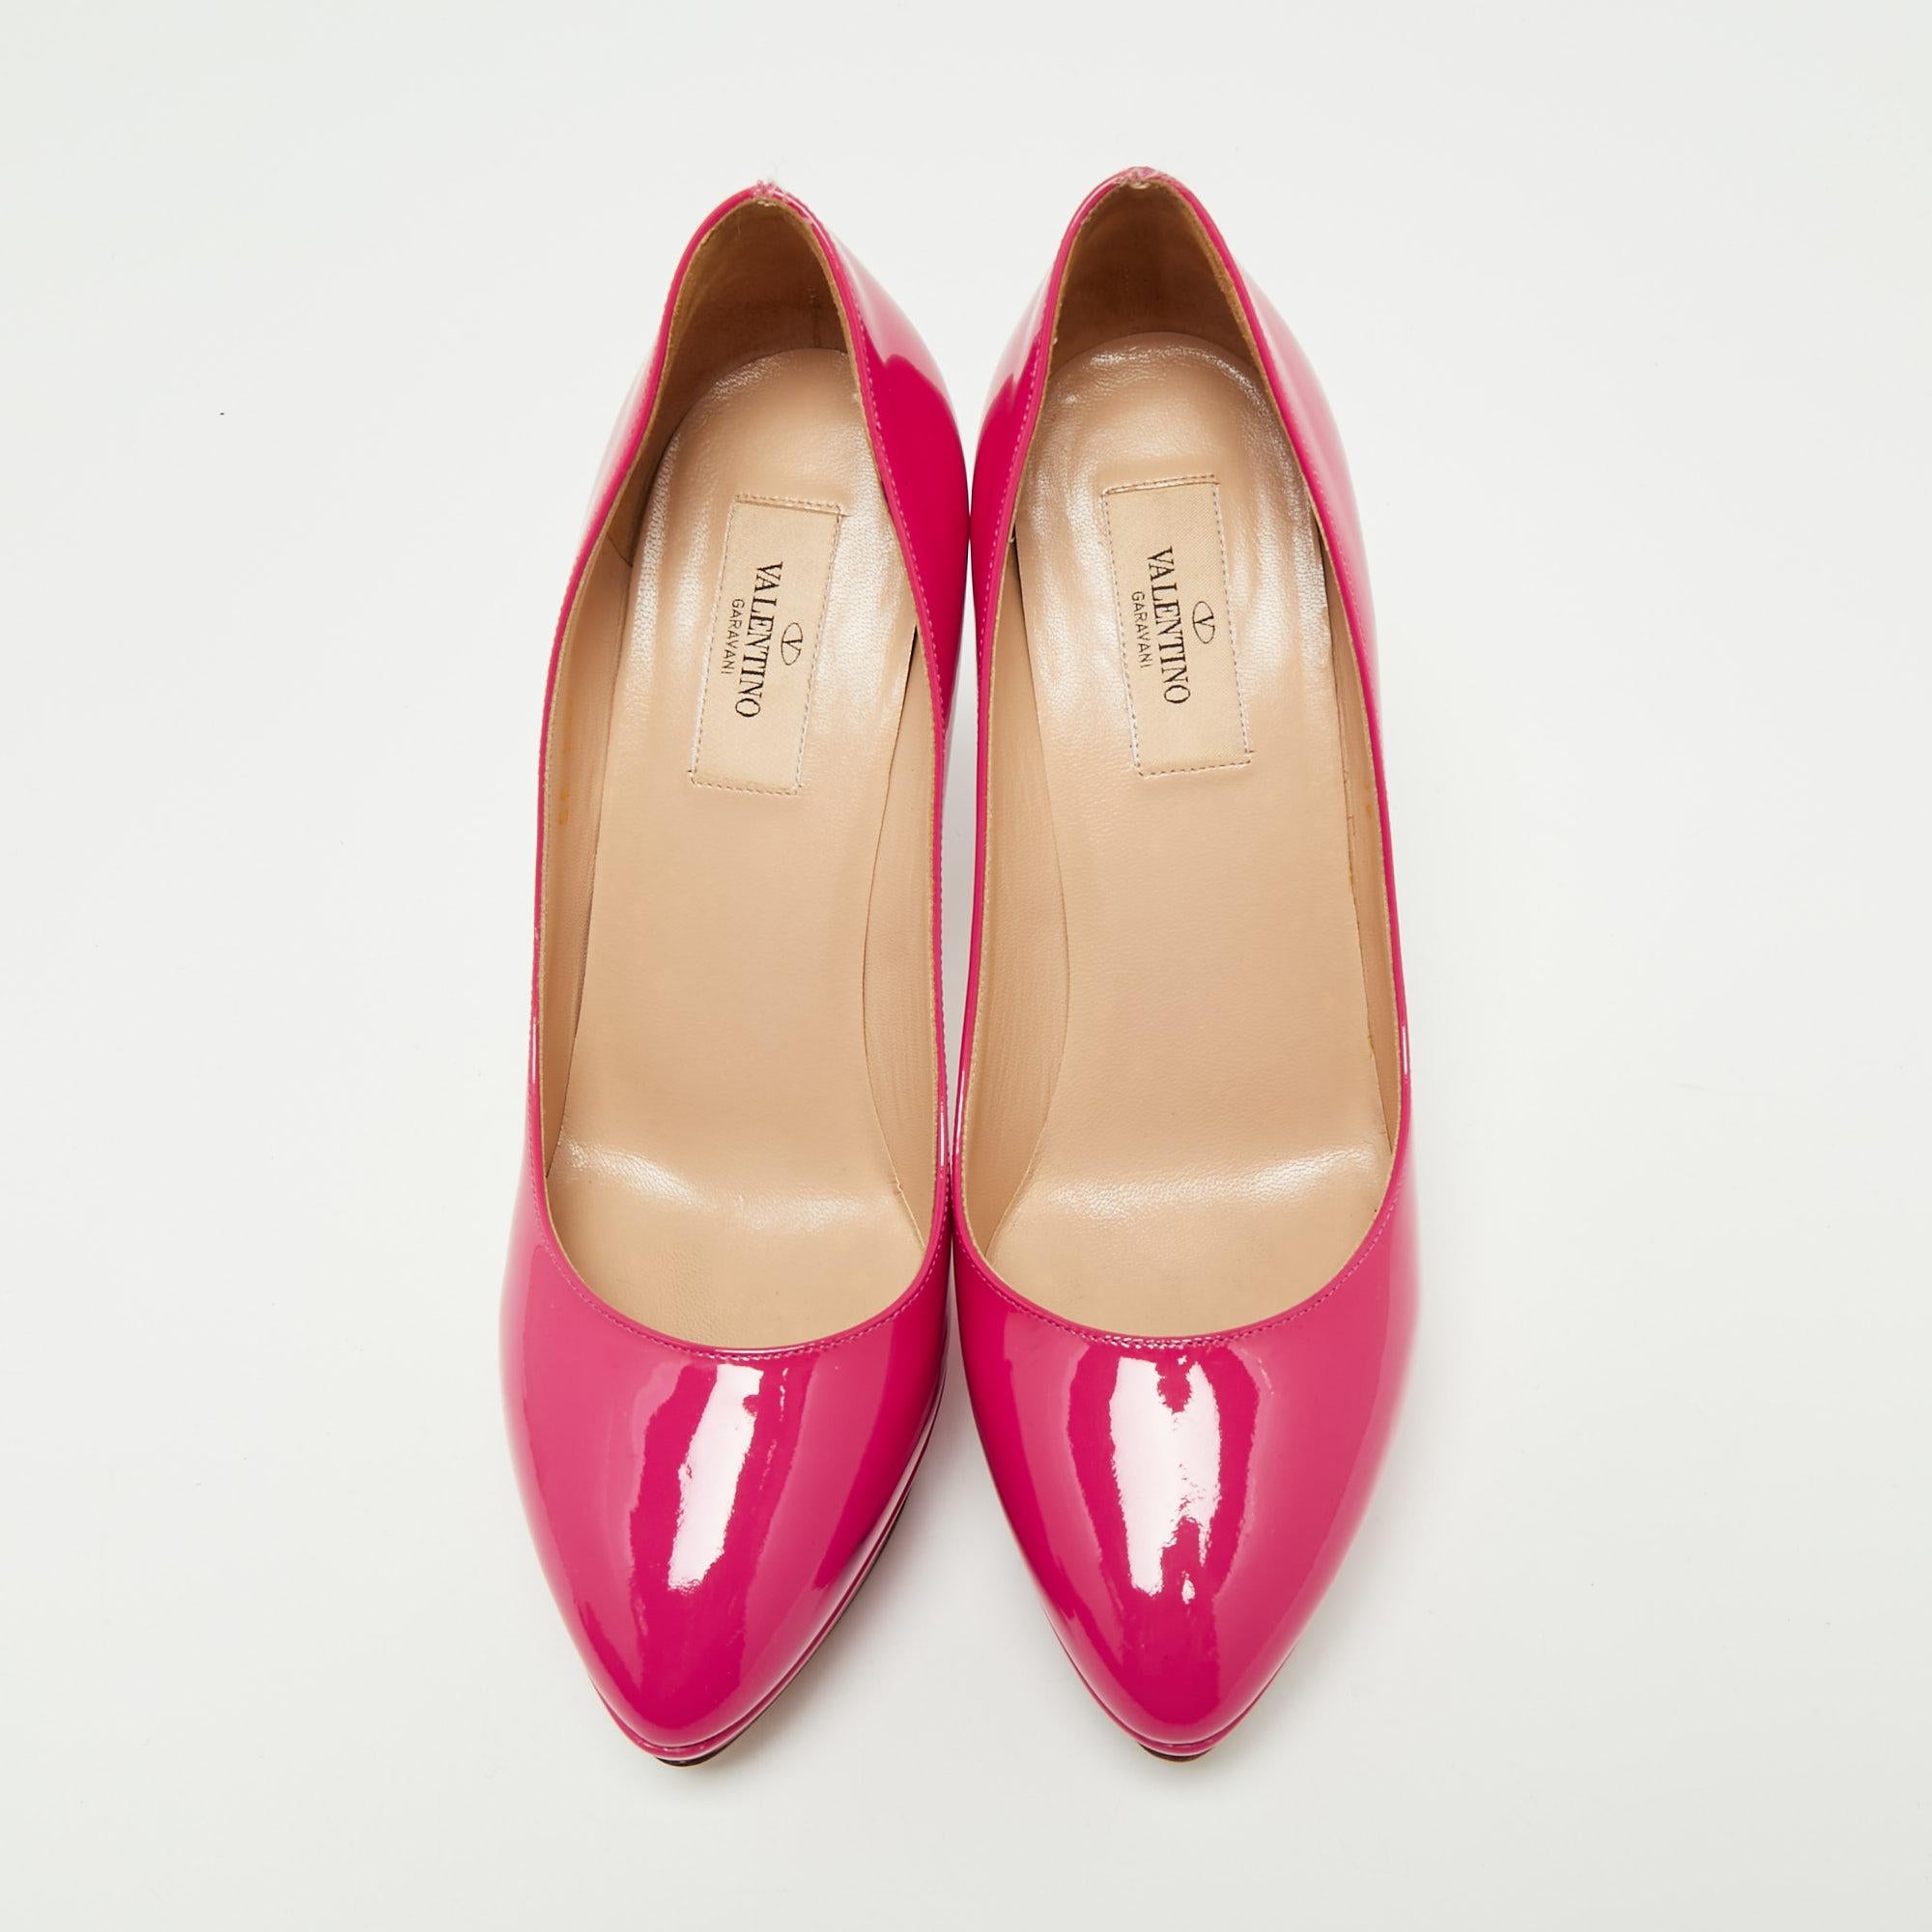 The 12cm heels of this pair of Valentino pumps will class up your looks effortlessly. Created from patent leather, it is added with platforms, and the precise cuts make it appealing.

Includes: Original Box, Original Dustbag

